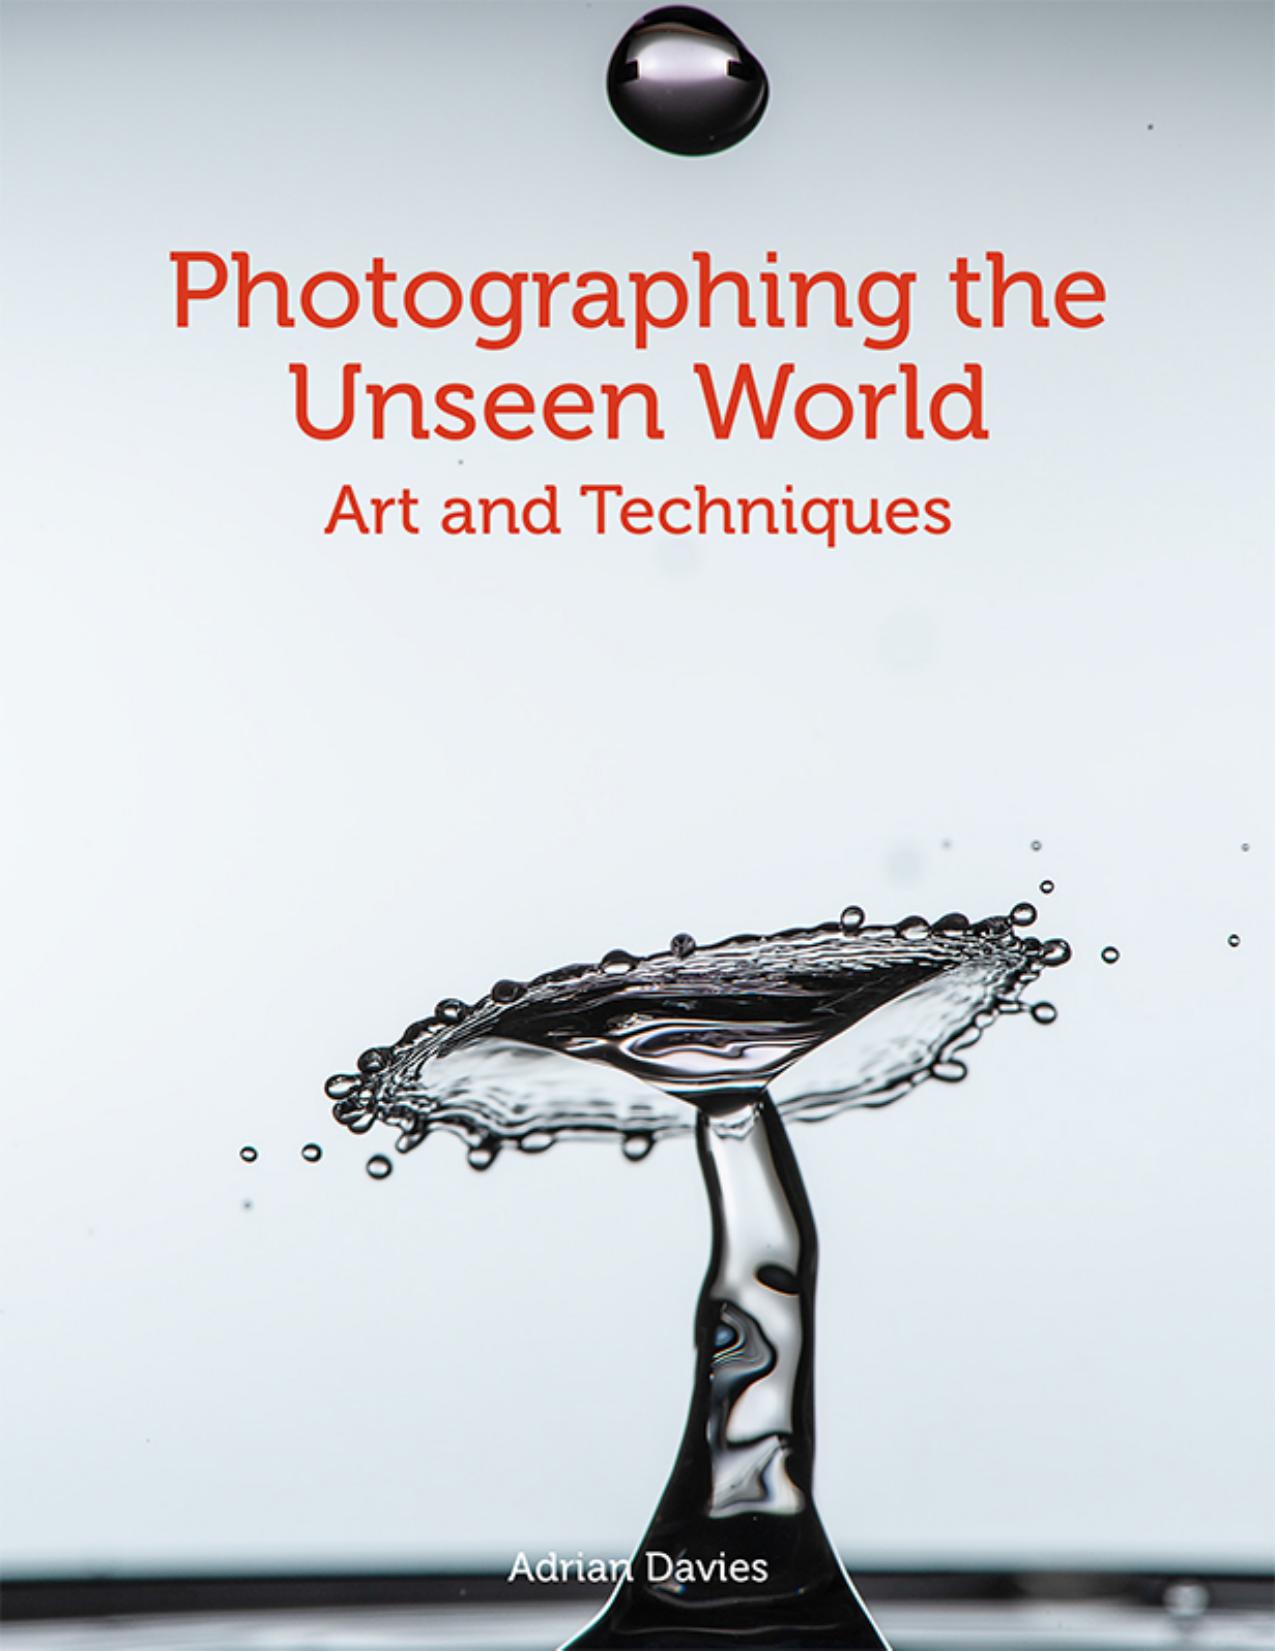 Photographing the Unseen World by Adrian Davies